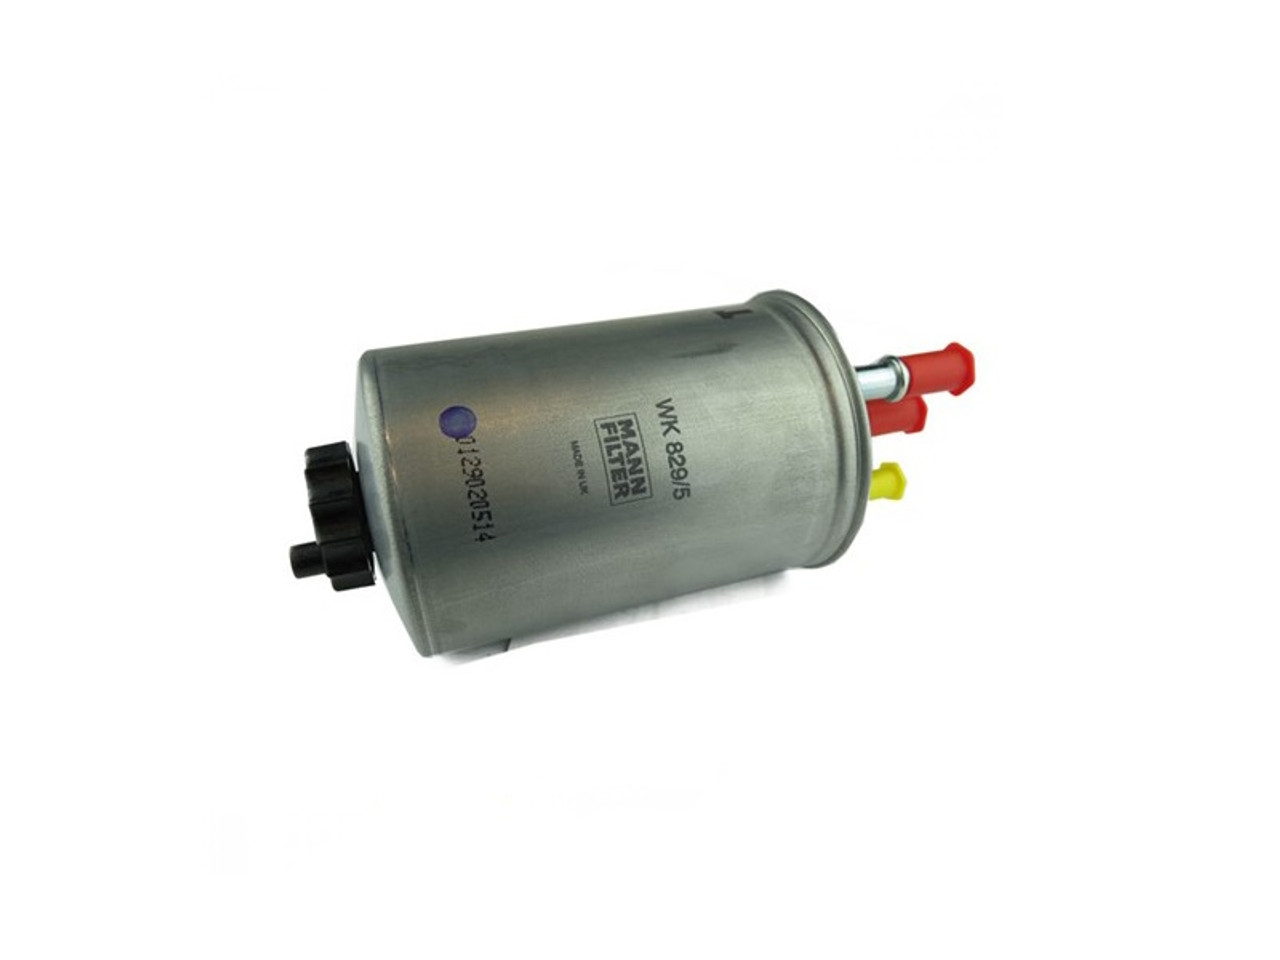 Mann and Hummel XJ, XF and S Type 2.7 V6 Diesel Fuel Filter - XR857585